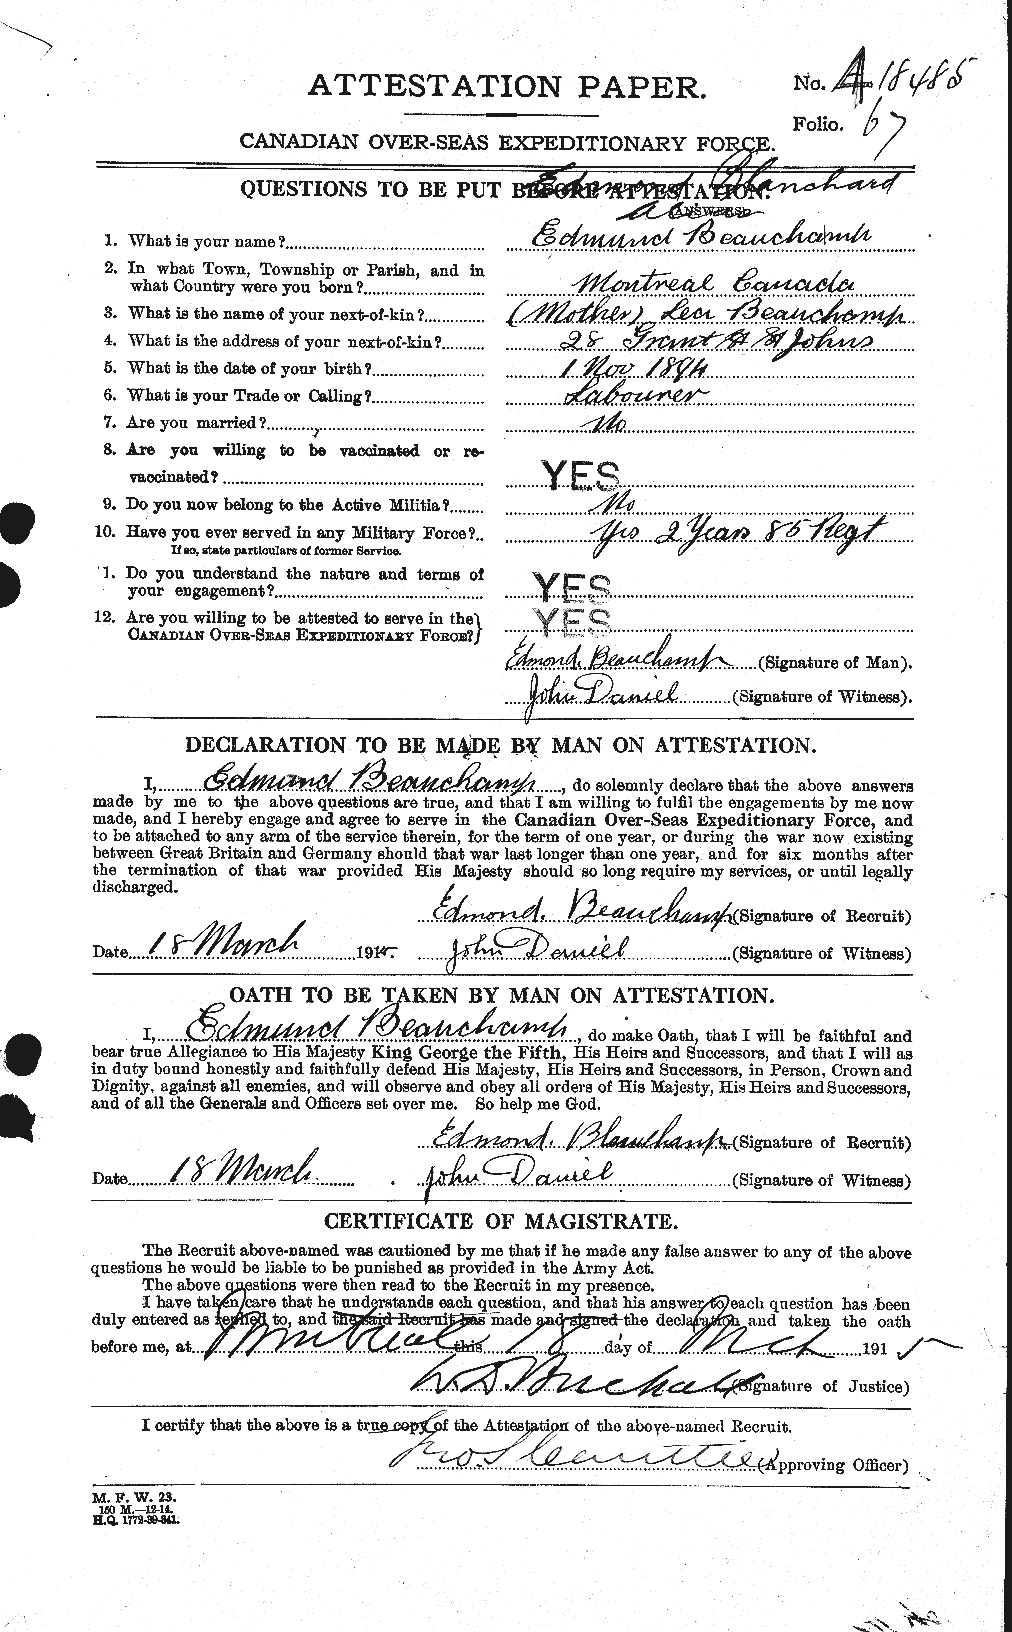 Personnel Records of the First World War - CEF 240367a